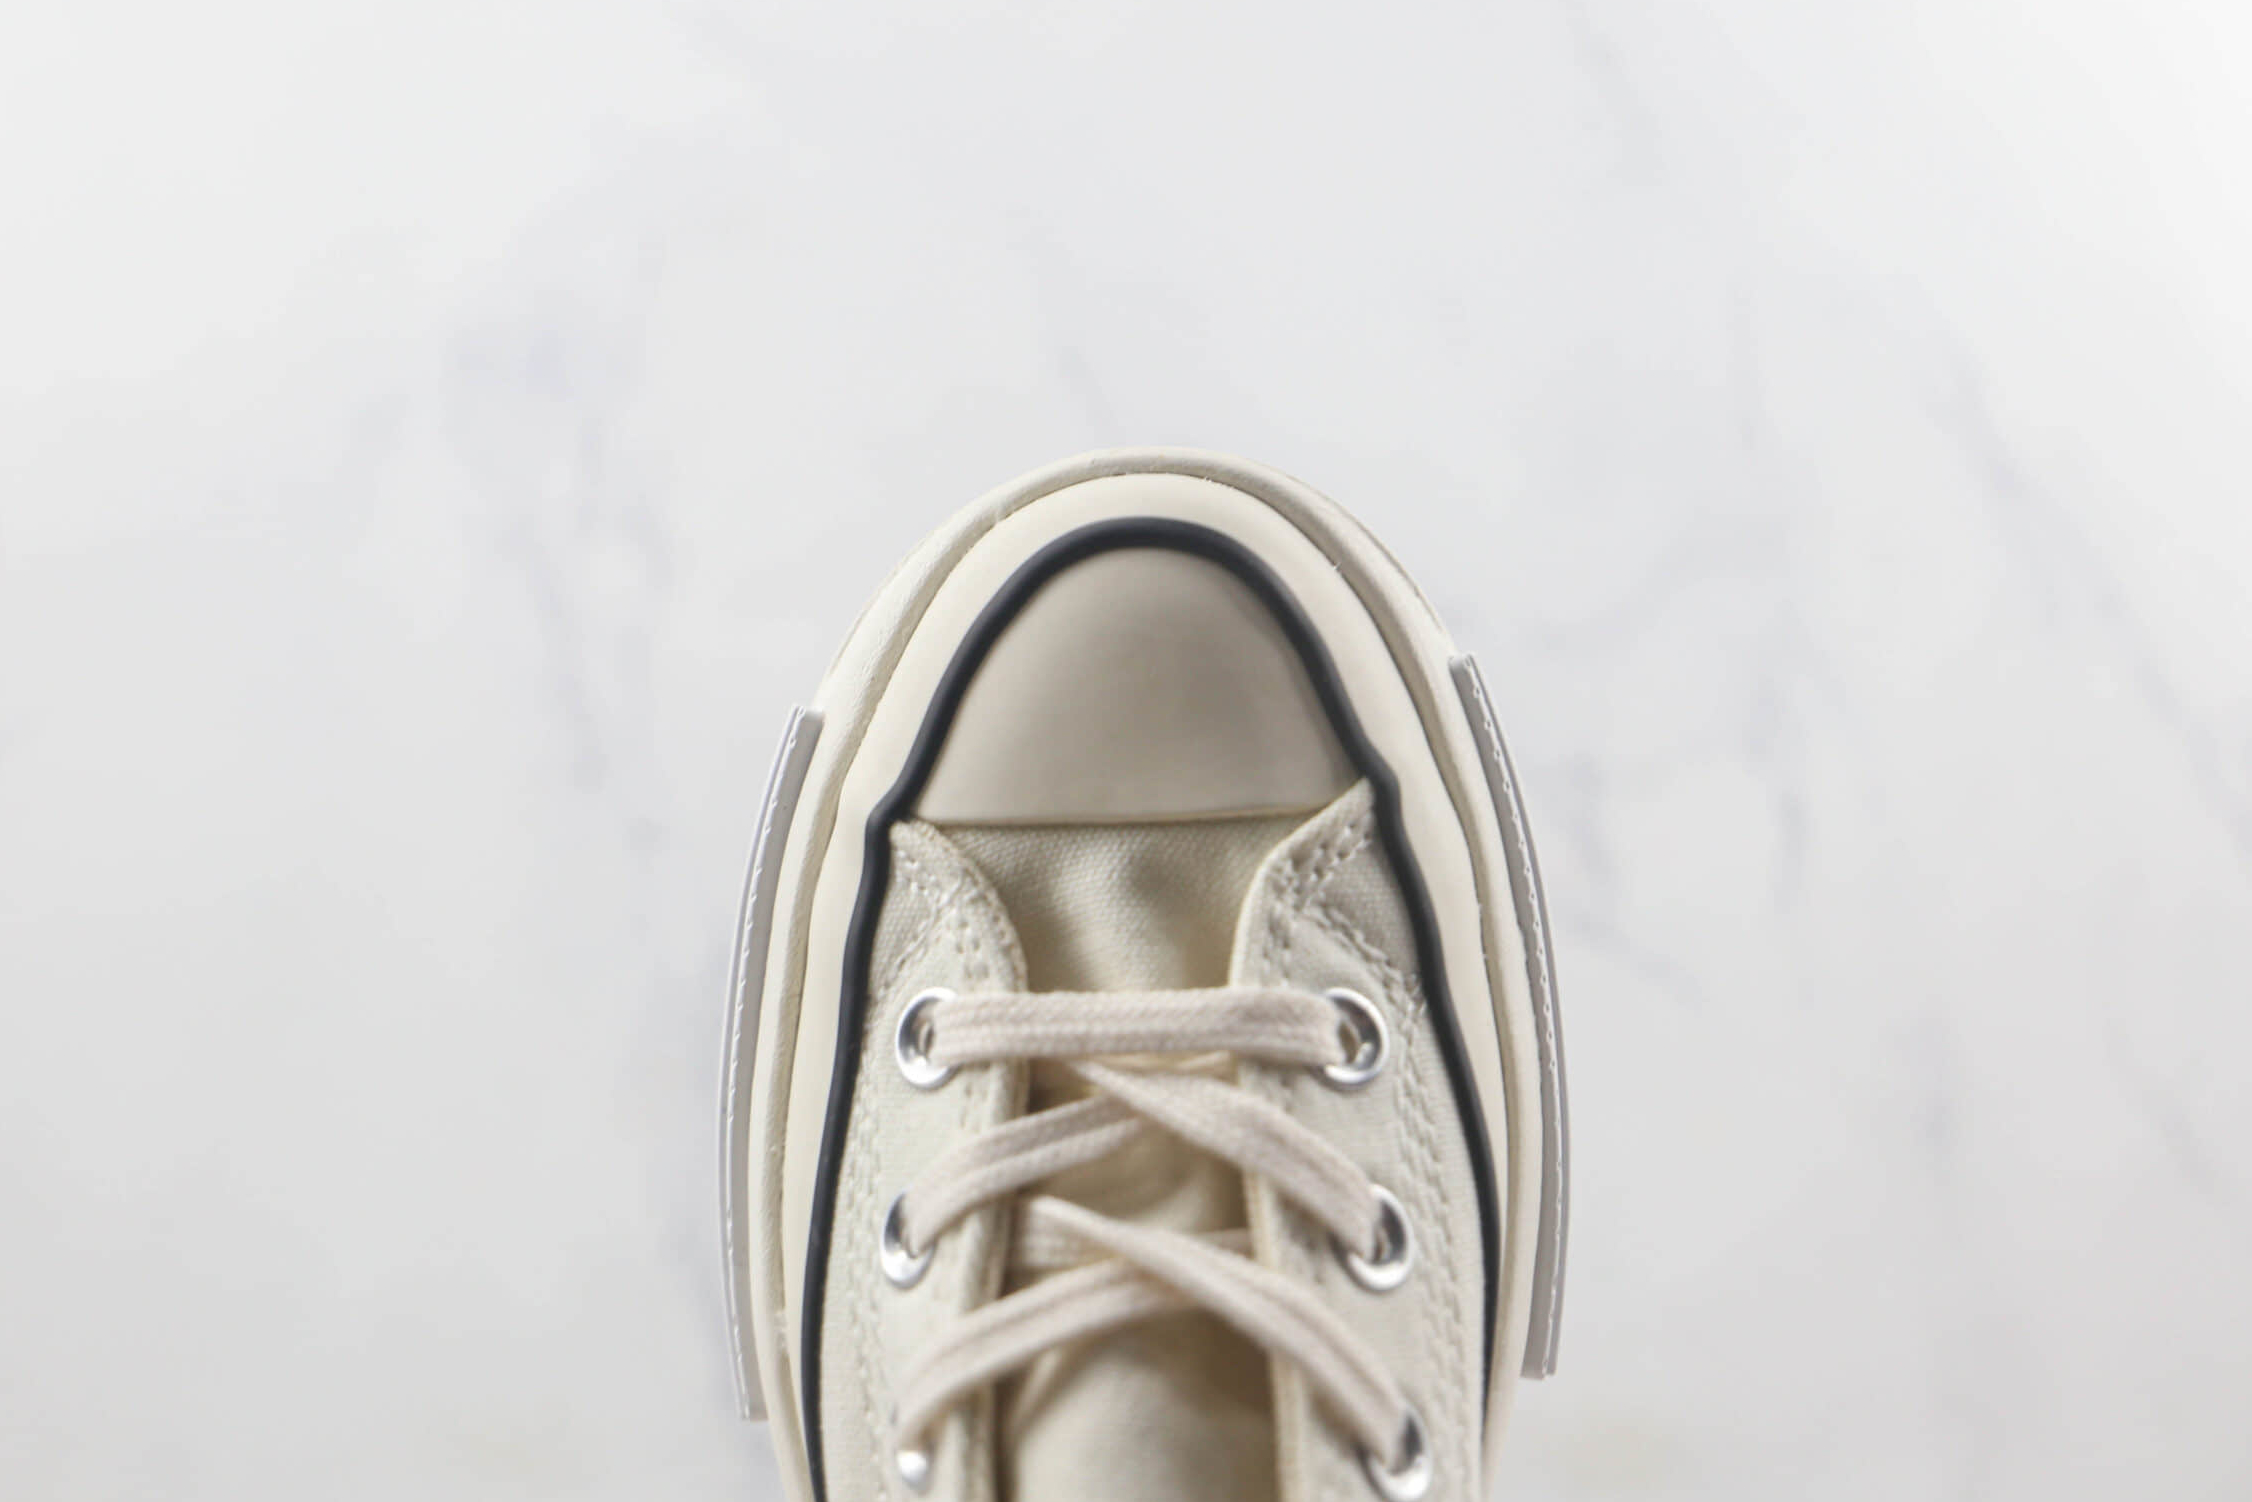 Converse Run Star Legacy CX High 'Egret' A00868C - Stylish and Iconic Footwear | Shop Now